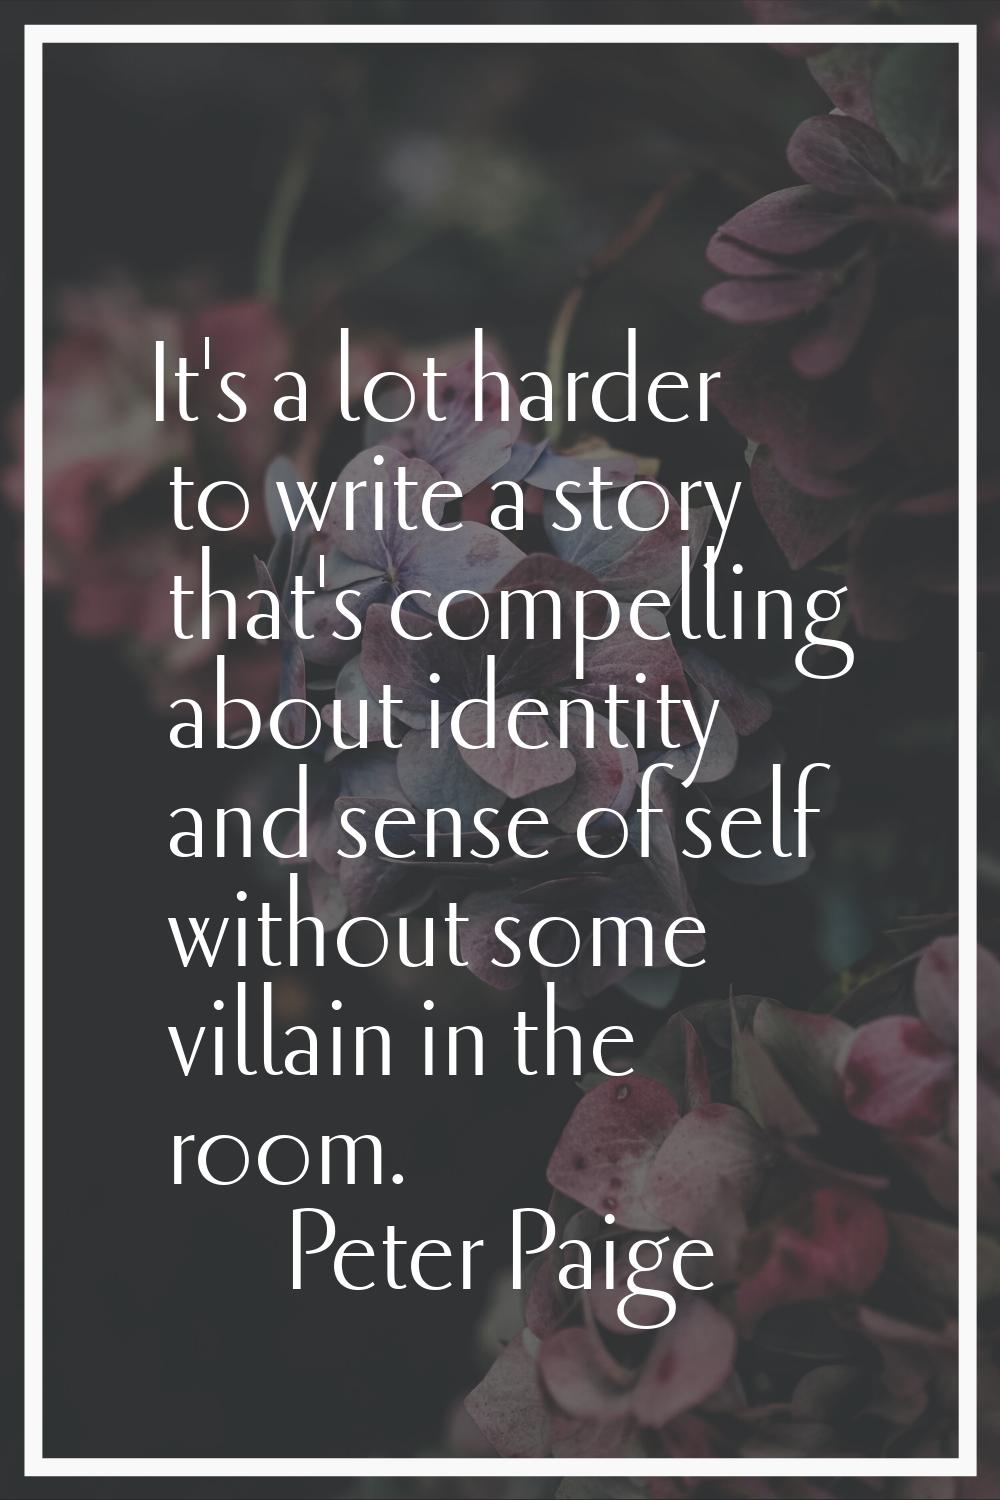 It's a lot harder to write a story that's compelling about identity and sense of self without some 